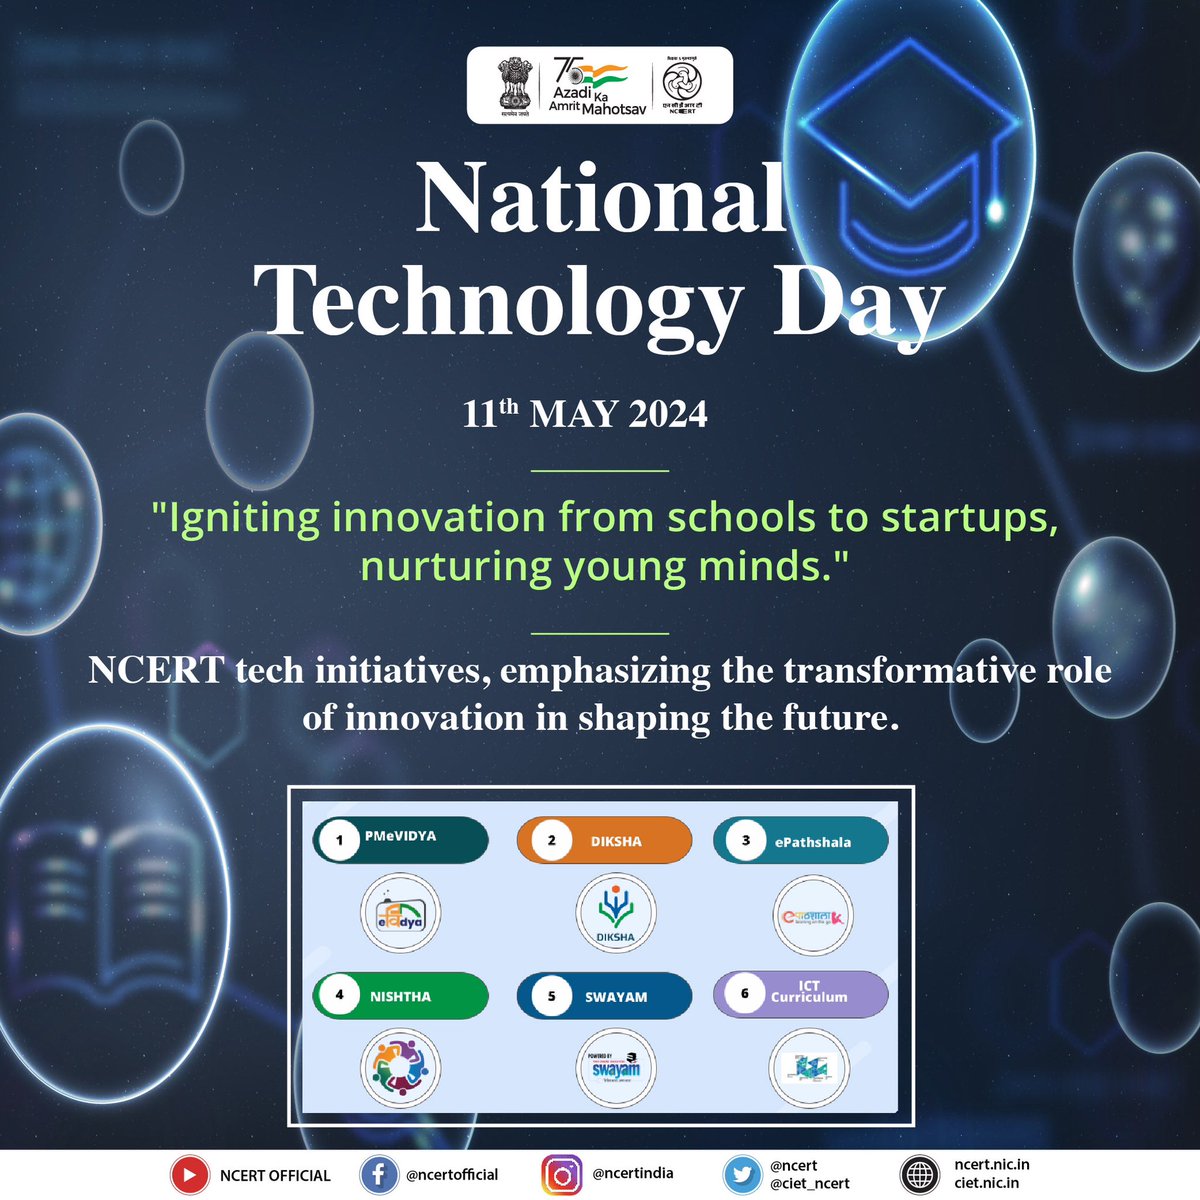 Happy National Technology Day 2024! This year, Celebrating under the theme “Igniting innovation from schools to startups, nurturing young minds.” From NCERT’s tech initiatives like DIKSHA and eJaadui Pitara to resources in Indian Sign Language, we’re empowering minds and